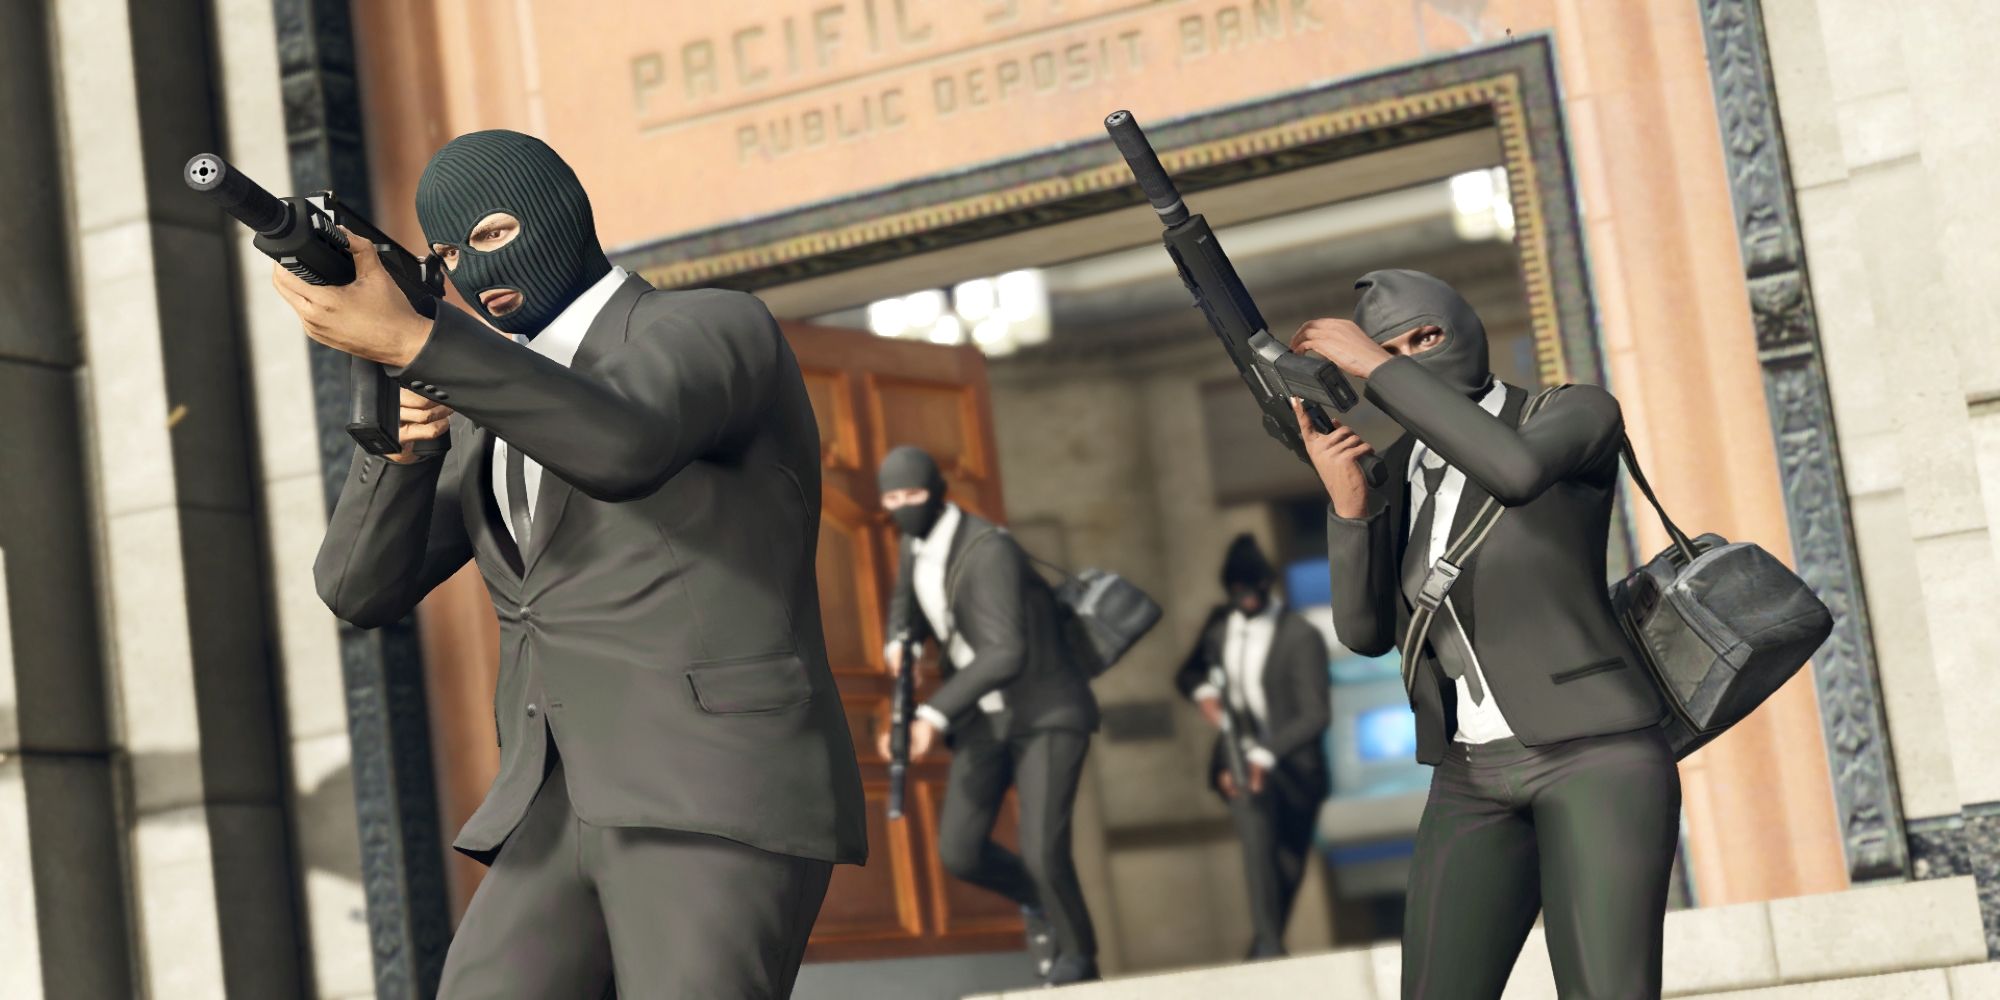 Players completing a heist in Grand Theft Auto Online.